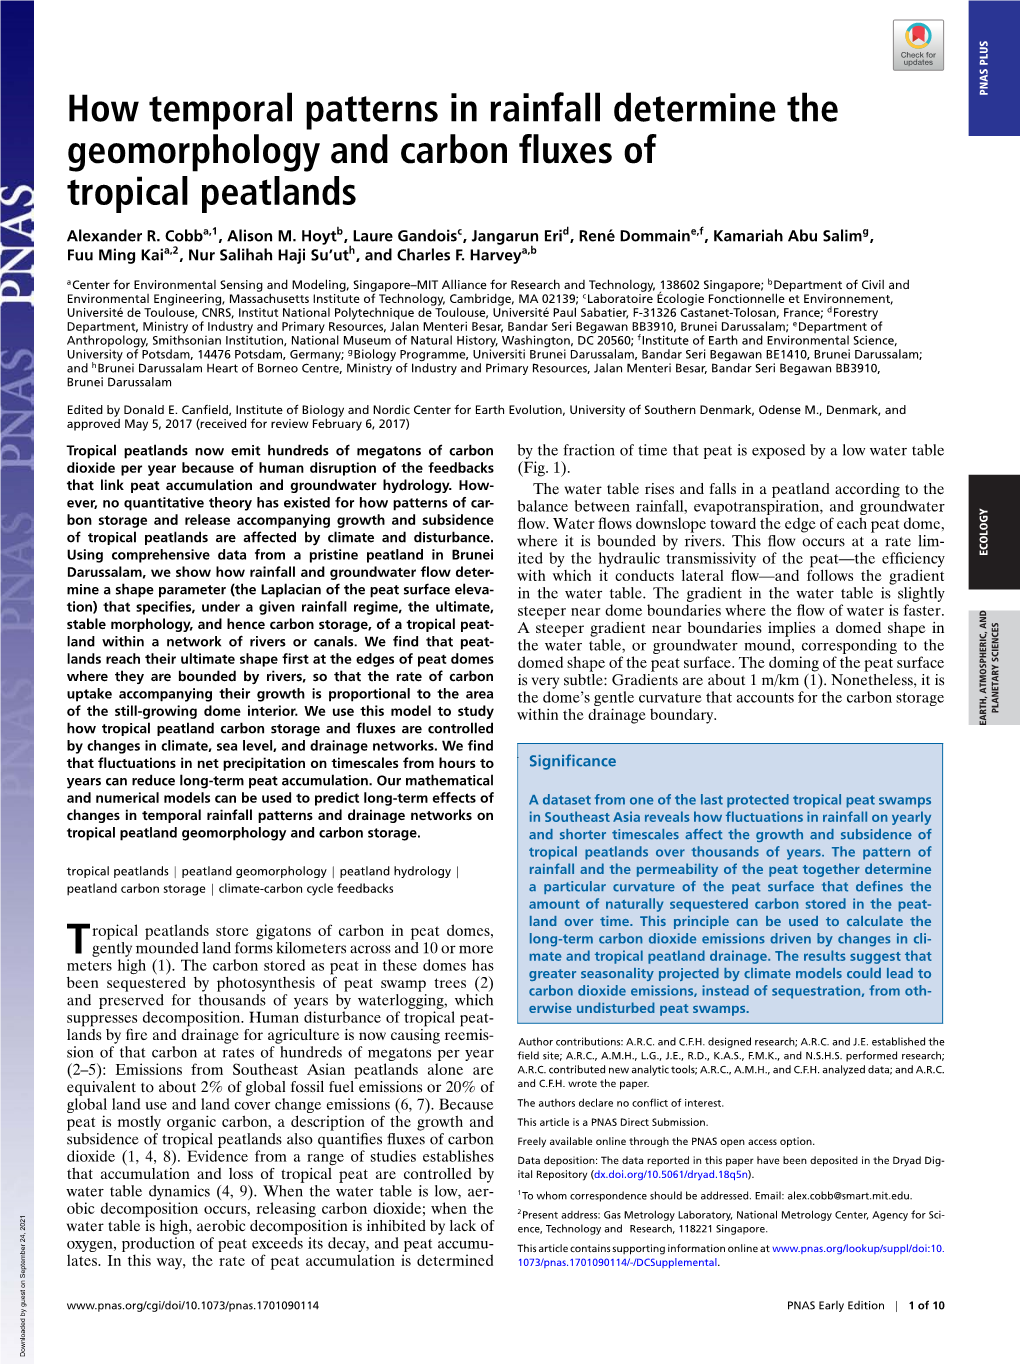 How Temporal Patterns in Rainfall Determine the Geomorphology And